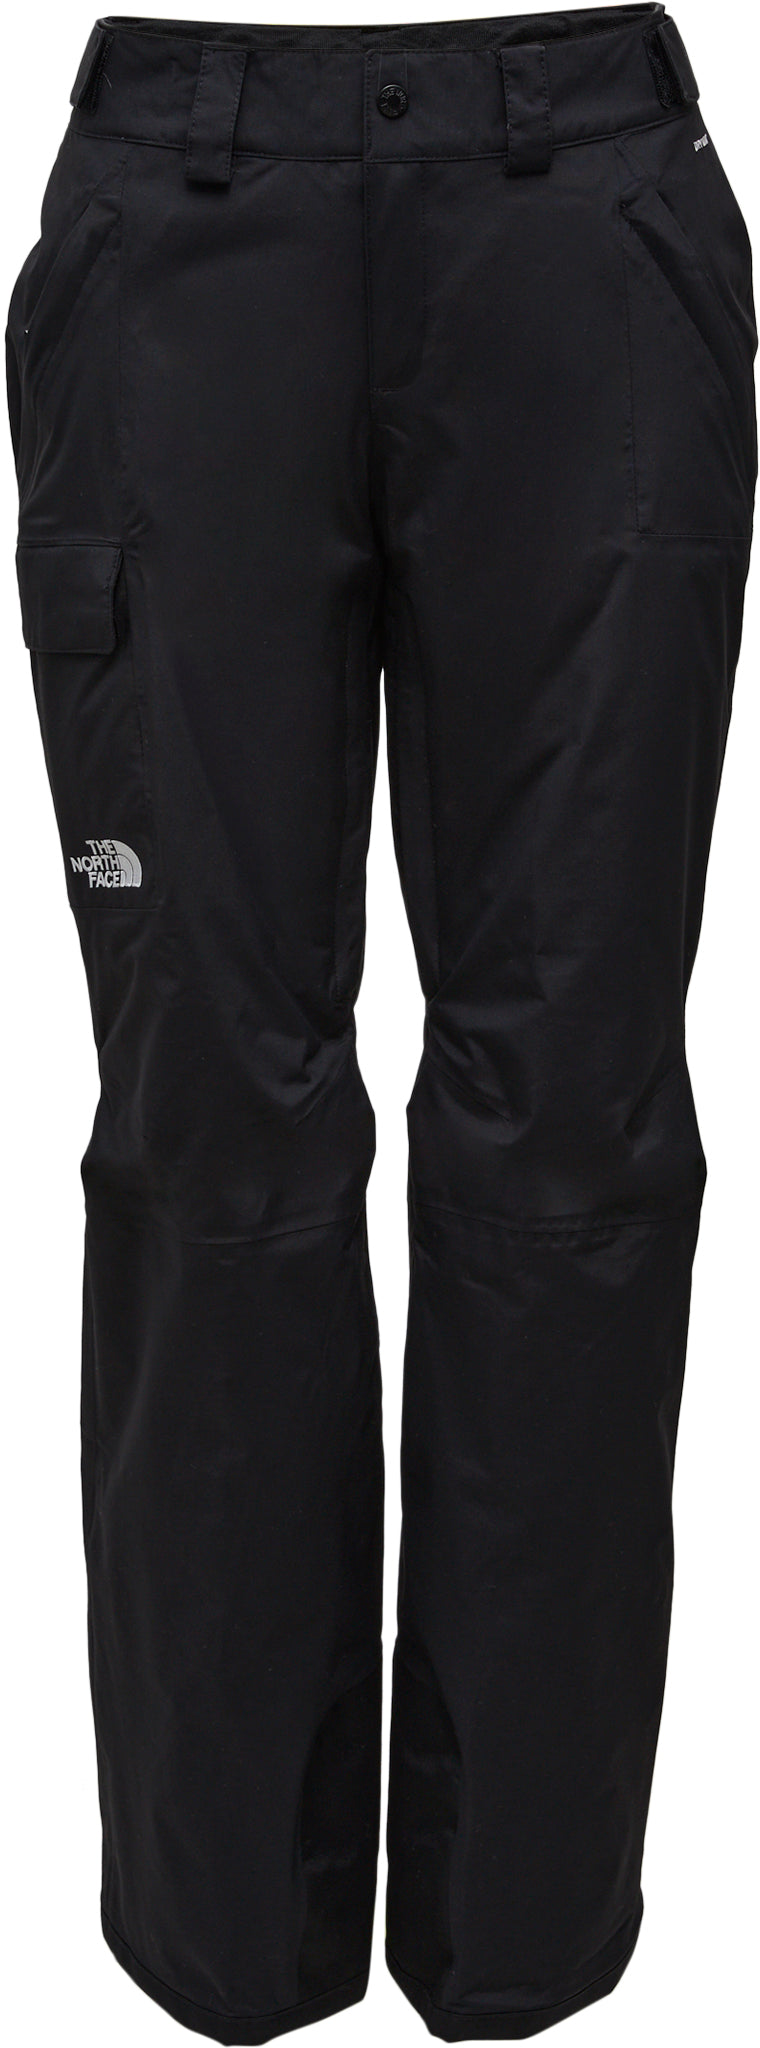 Women's The North Face 3/4 Pants Black Casual Size 6